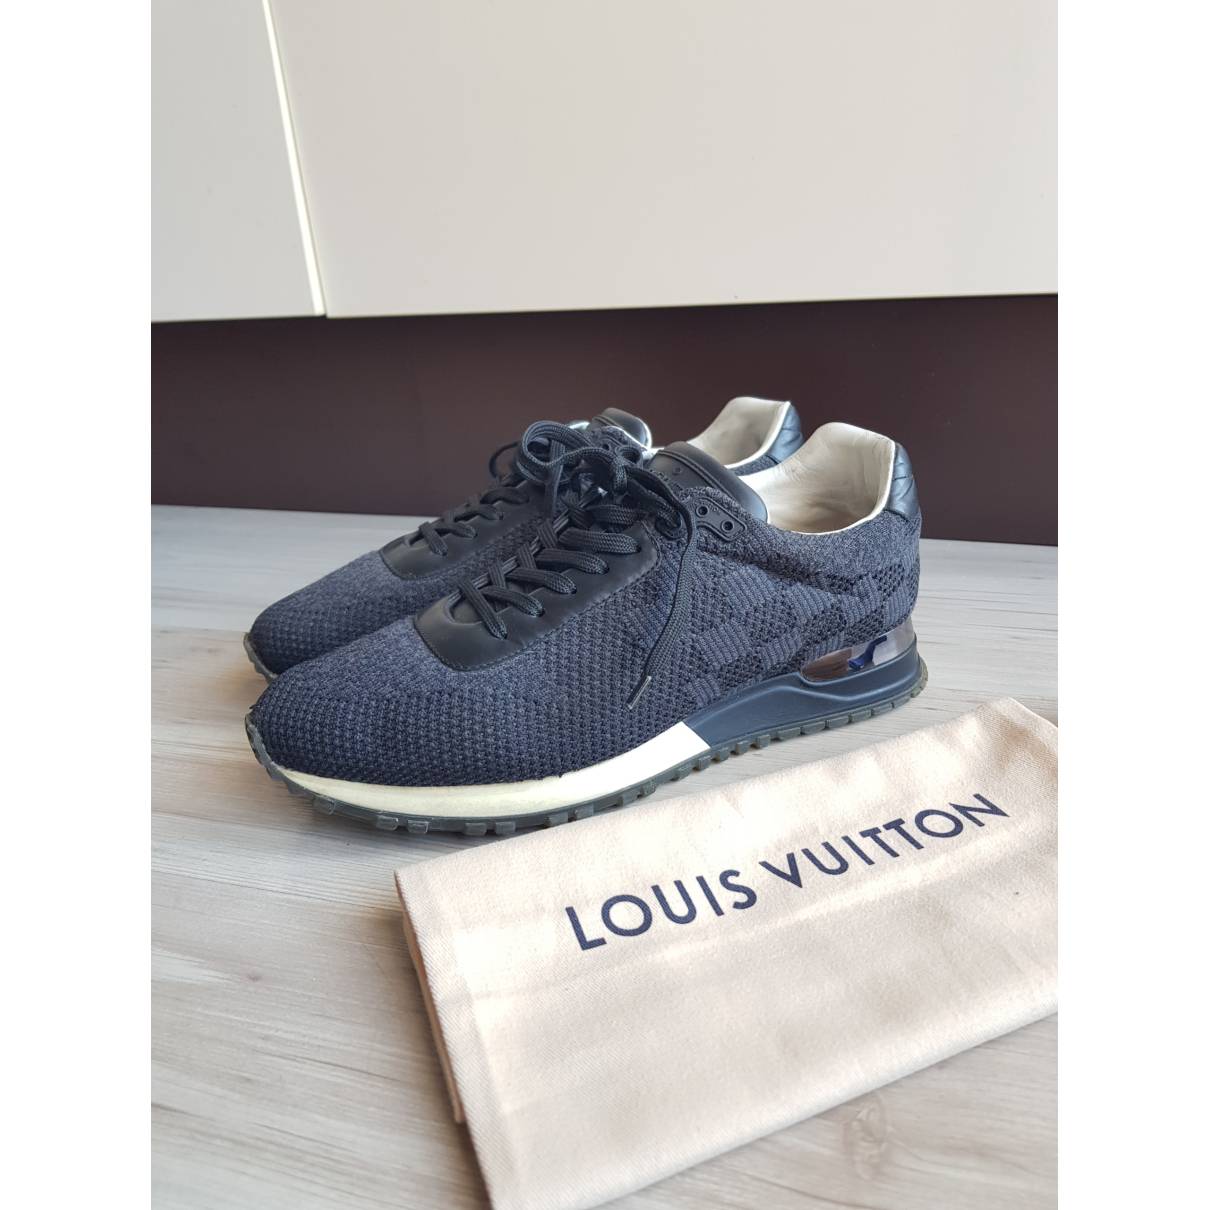 Lv runner active cloth low trainers Louis Vuitton Black size 11 UK in Cloth  - 32337850